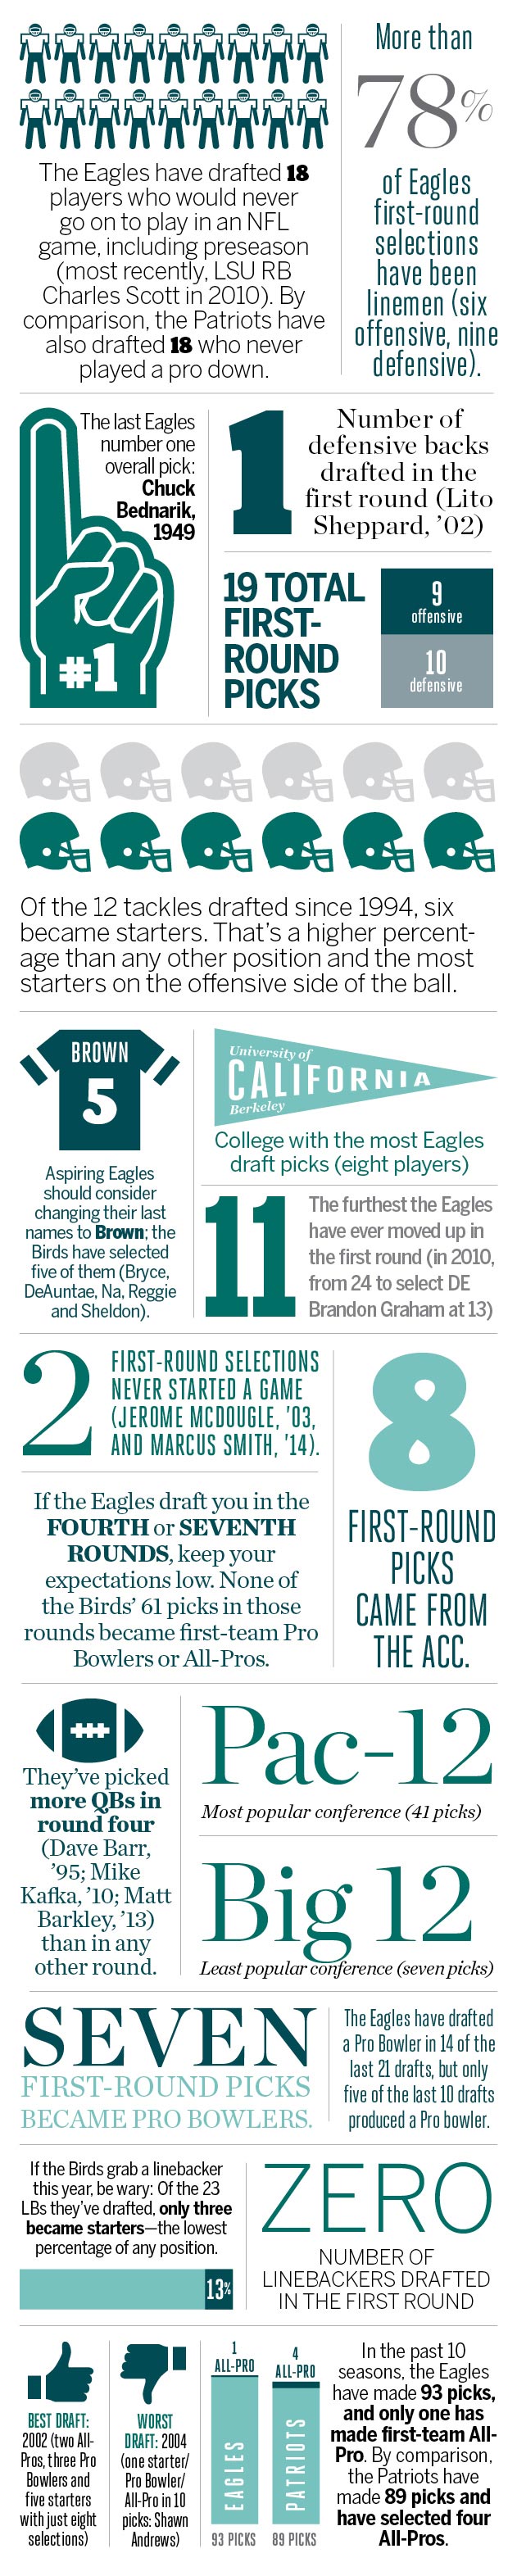 eagles-infographic-631